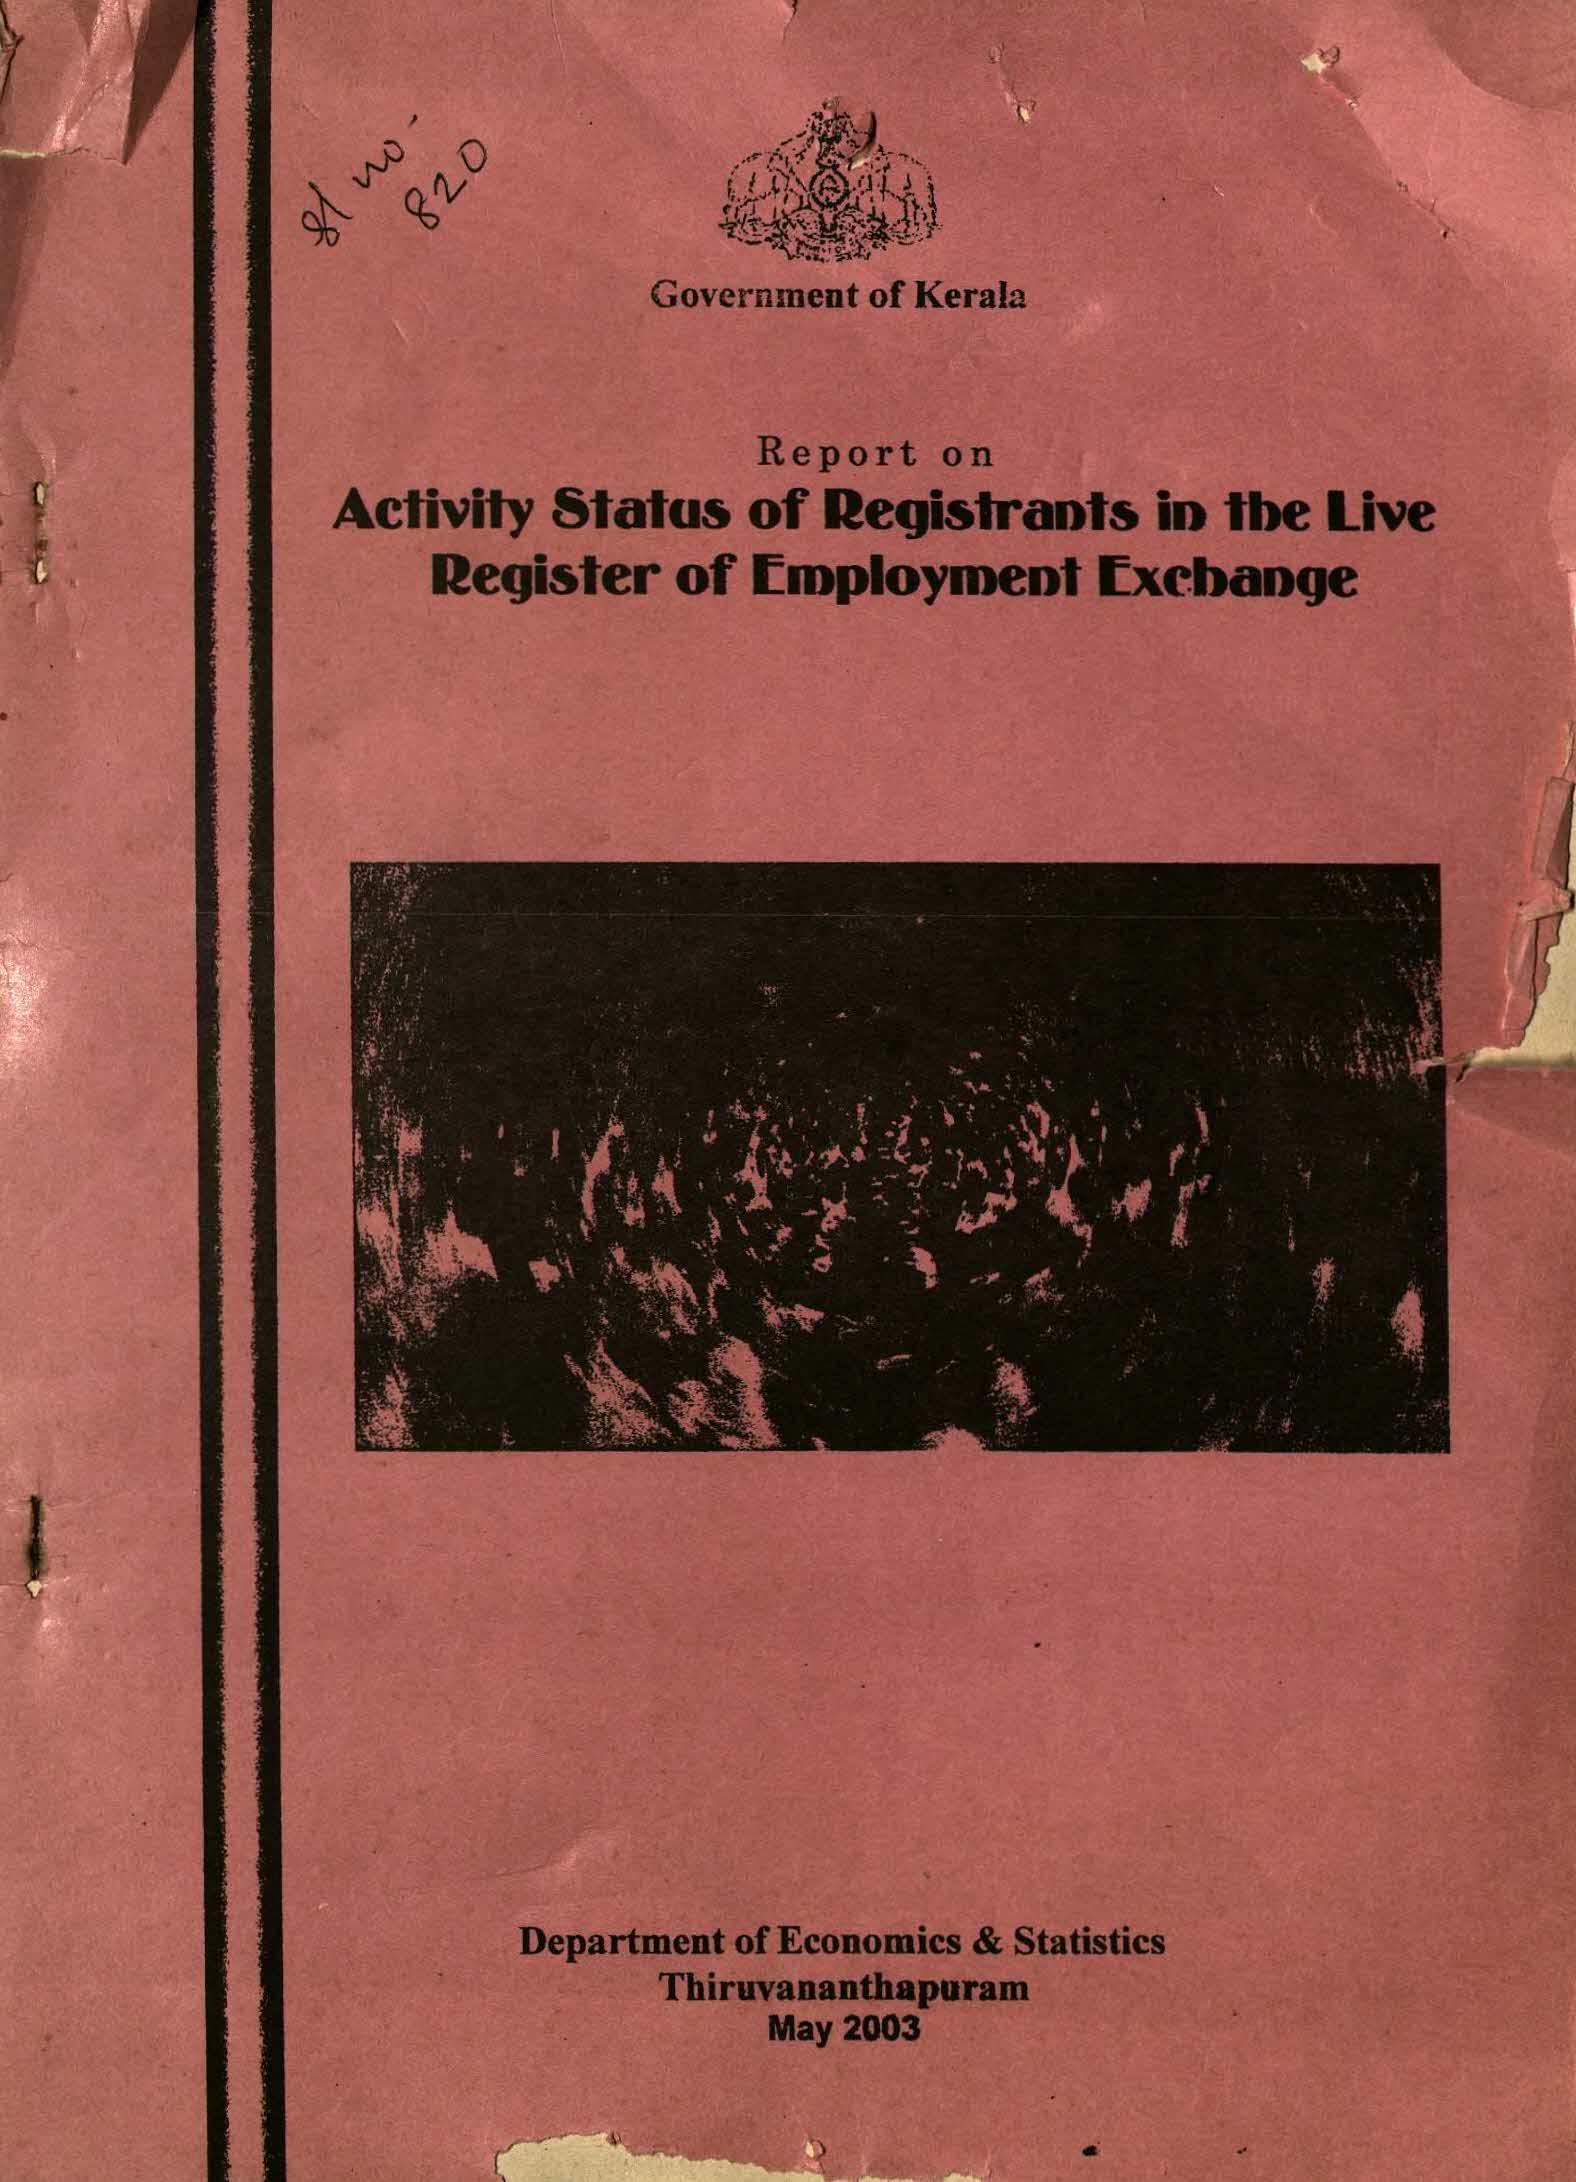 Report on Activity Status of Registrants in the Live register of Employment Exchanges